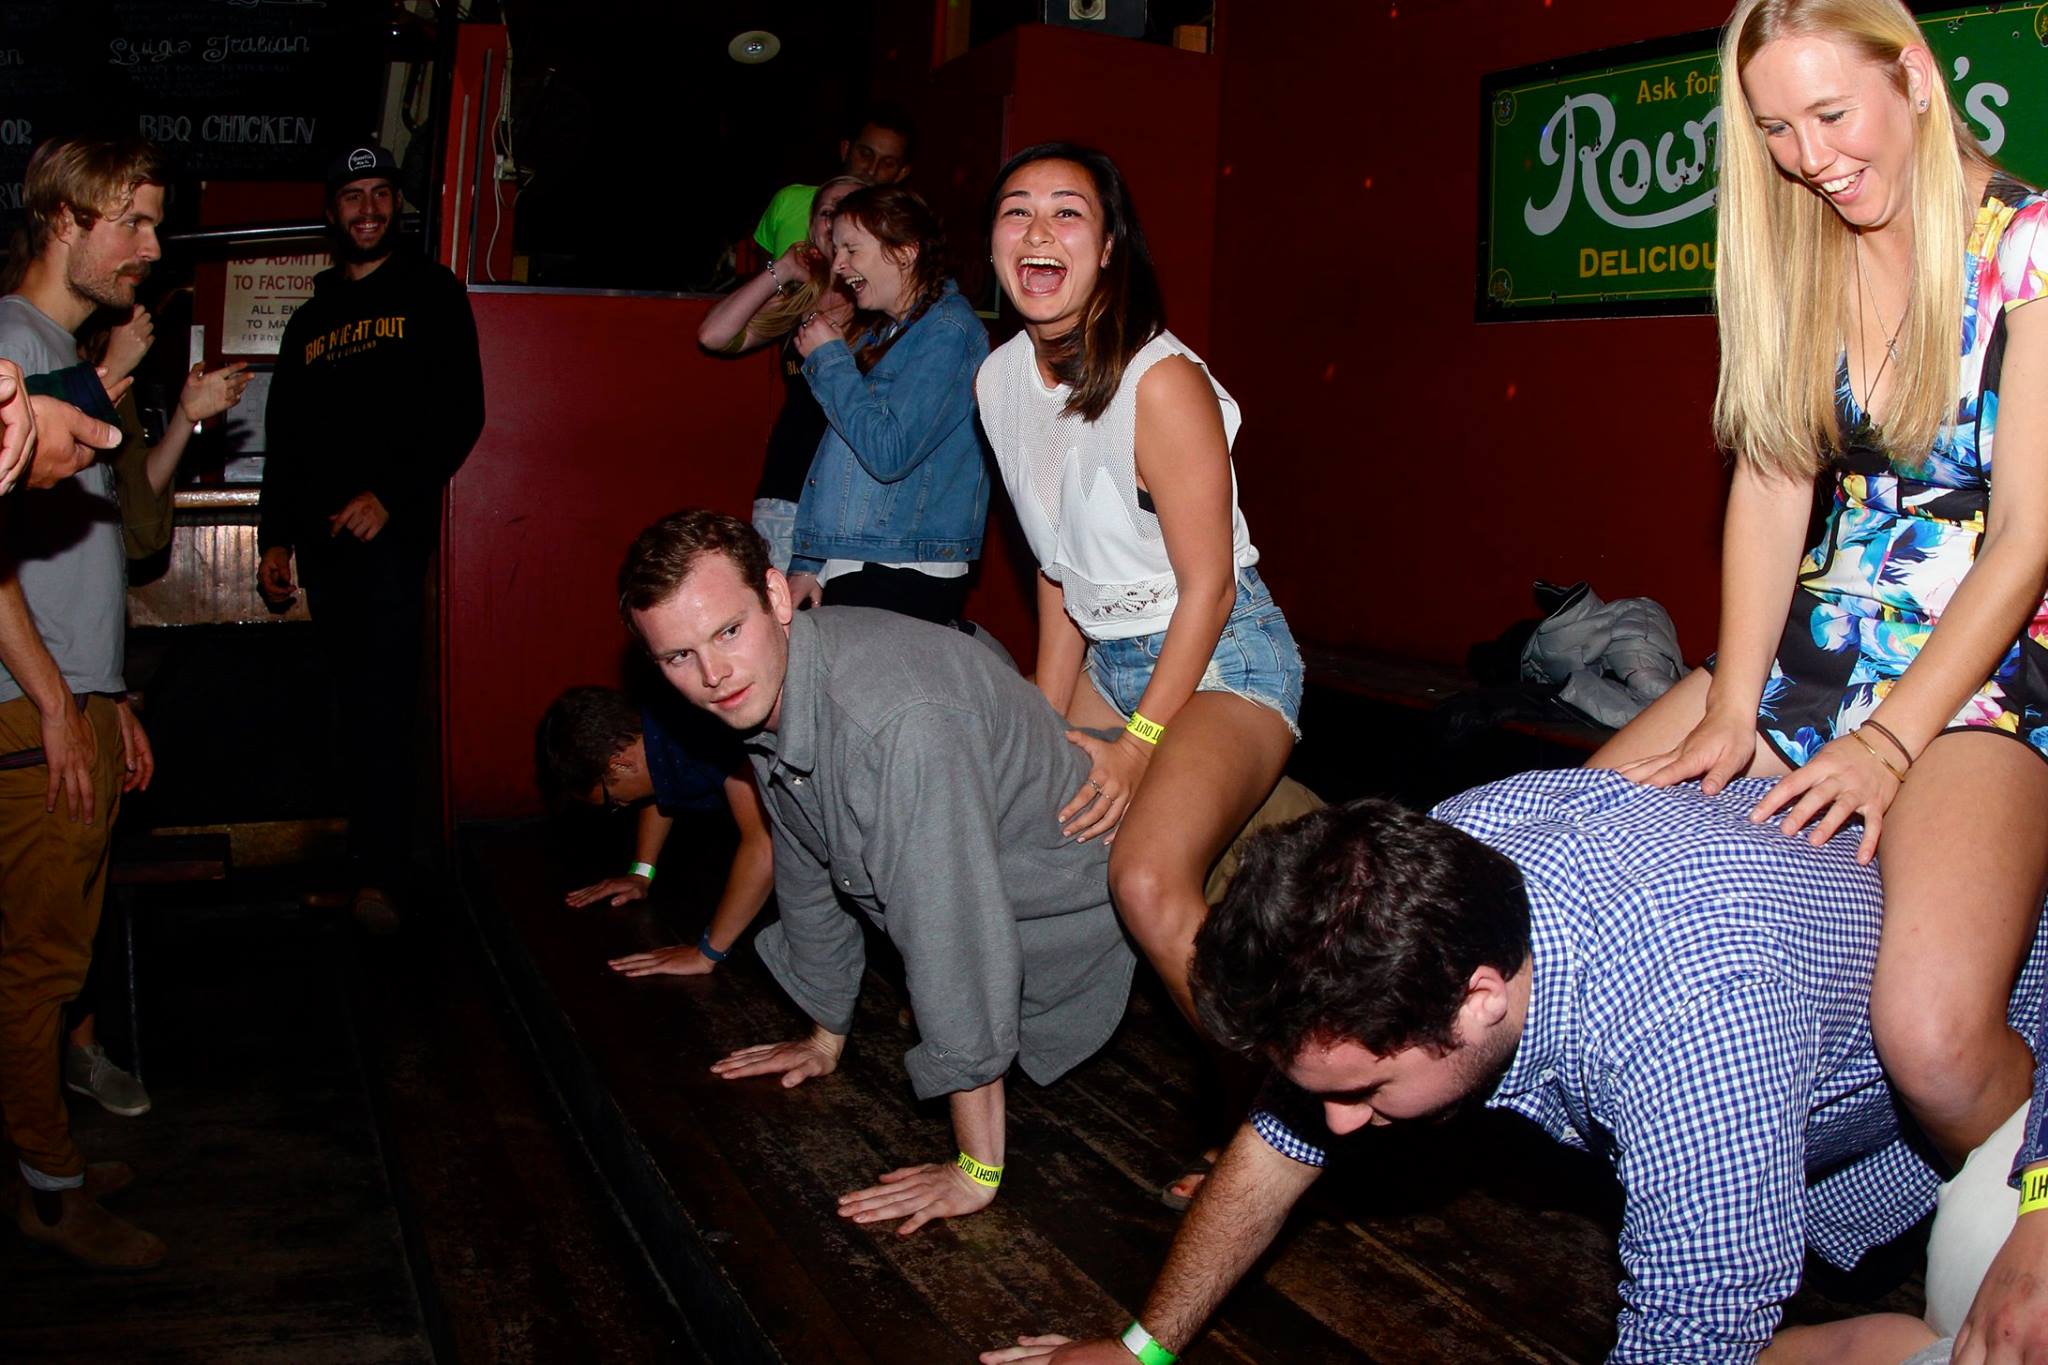 hilarious party games played on the big night out pub crawl Saturday nights in Queenstown